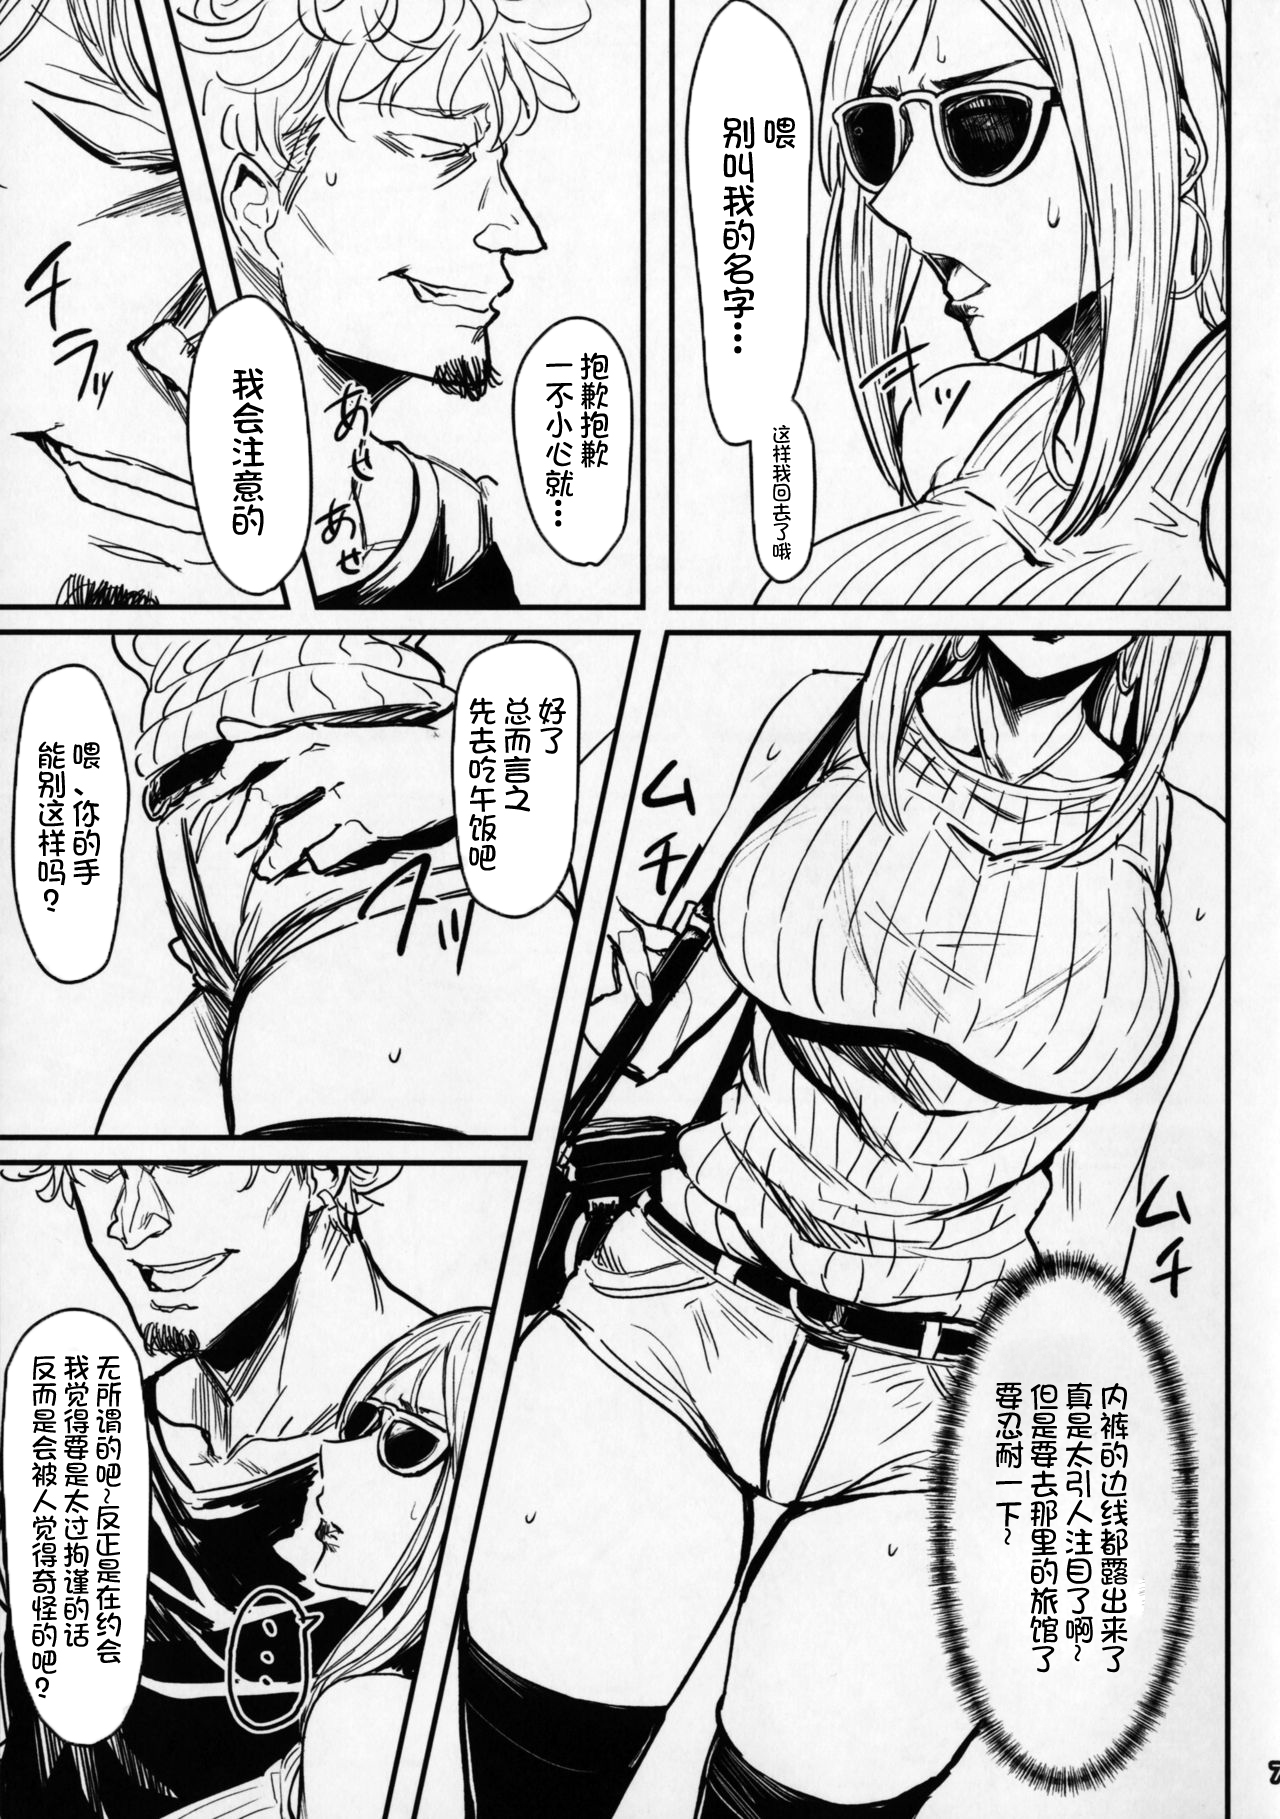 (COMITIA120) [Isocurve (Allegro)] Special EXtra FRIEND SeFrie Tsuma Yukari Vol.01(Preview Version) [Chinese] [不咕鸟汉化组] (コミティア120) [アイソカーブ (アレグロ)] Special EXtra FRIEND セフレ妻ゆかり Vol.01(プレビュー版) [中国翻訳]